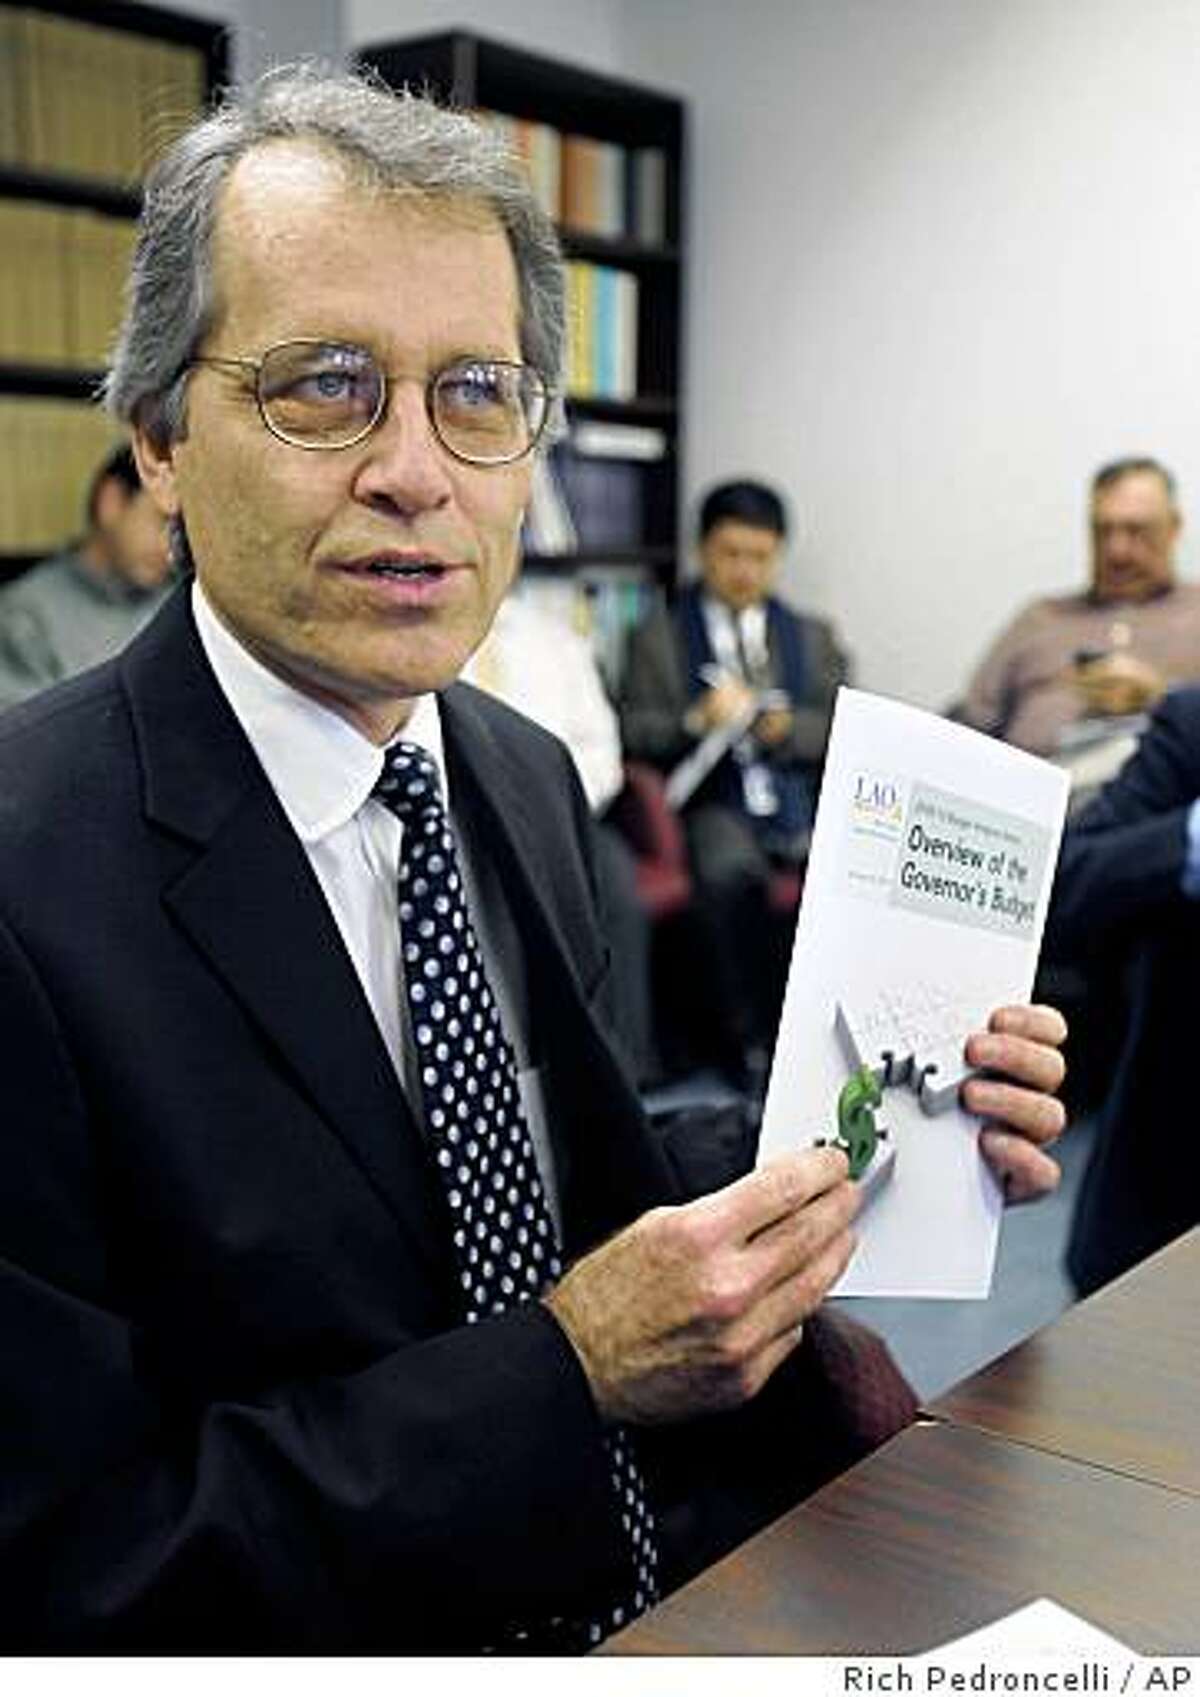 Legislative Analyst Mac Taylor displays a copy of his office's overview of Gov. Arnold Schwarzenegger's proposed 2009-10 state budget during a news conference in Sacramento, Calif., Thursday, Jan. 8, 2009.(AP Photo/Rich Pedroncelli)